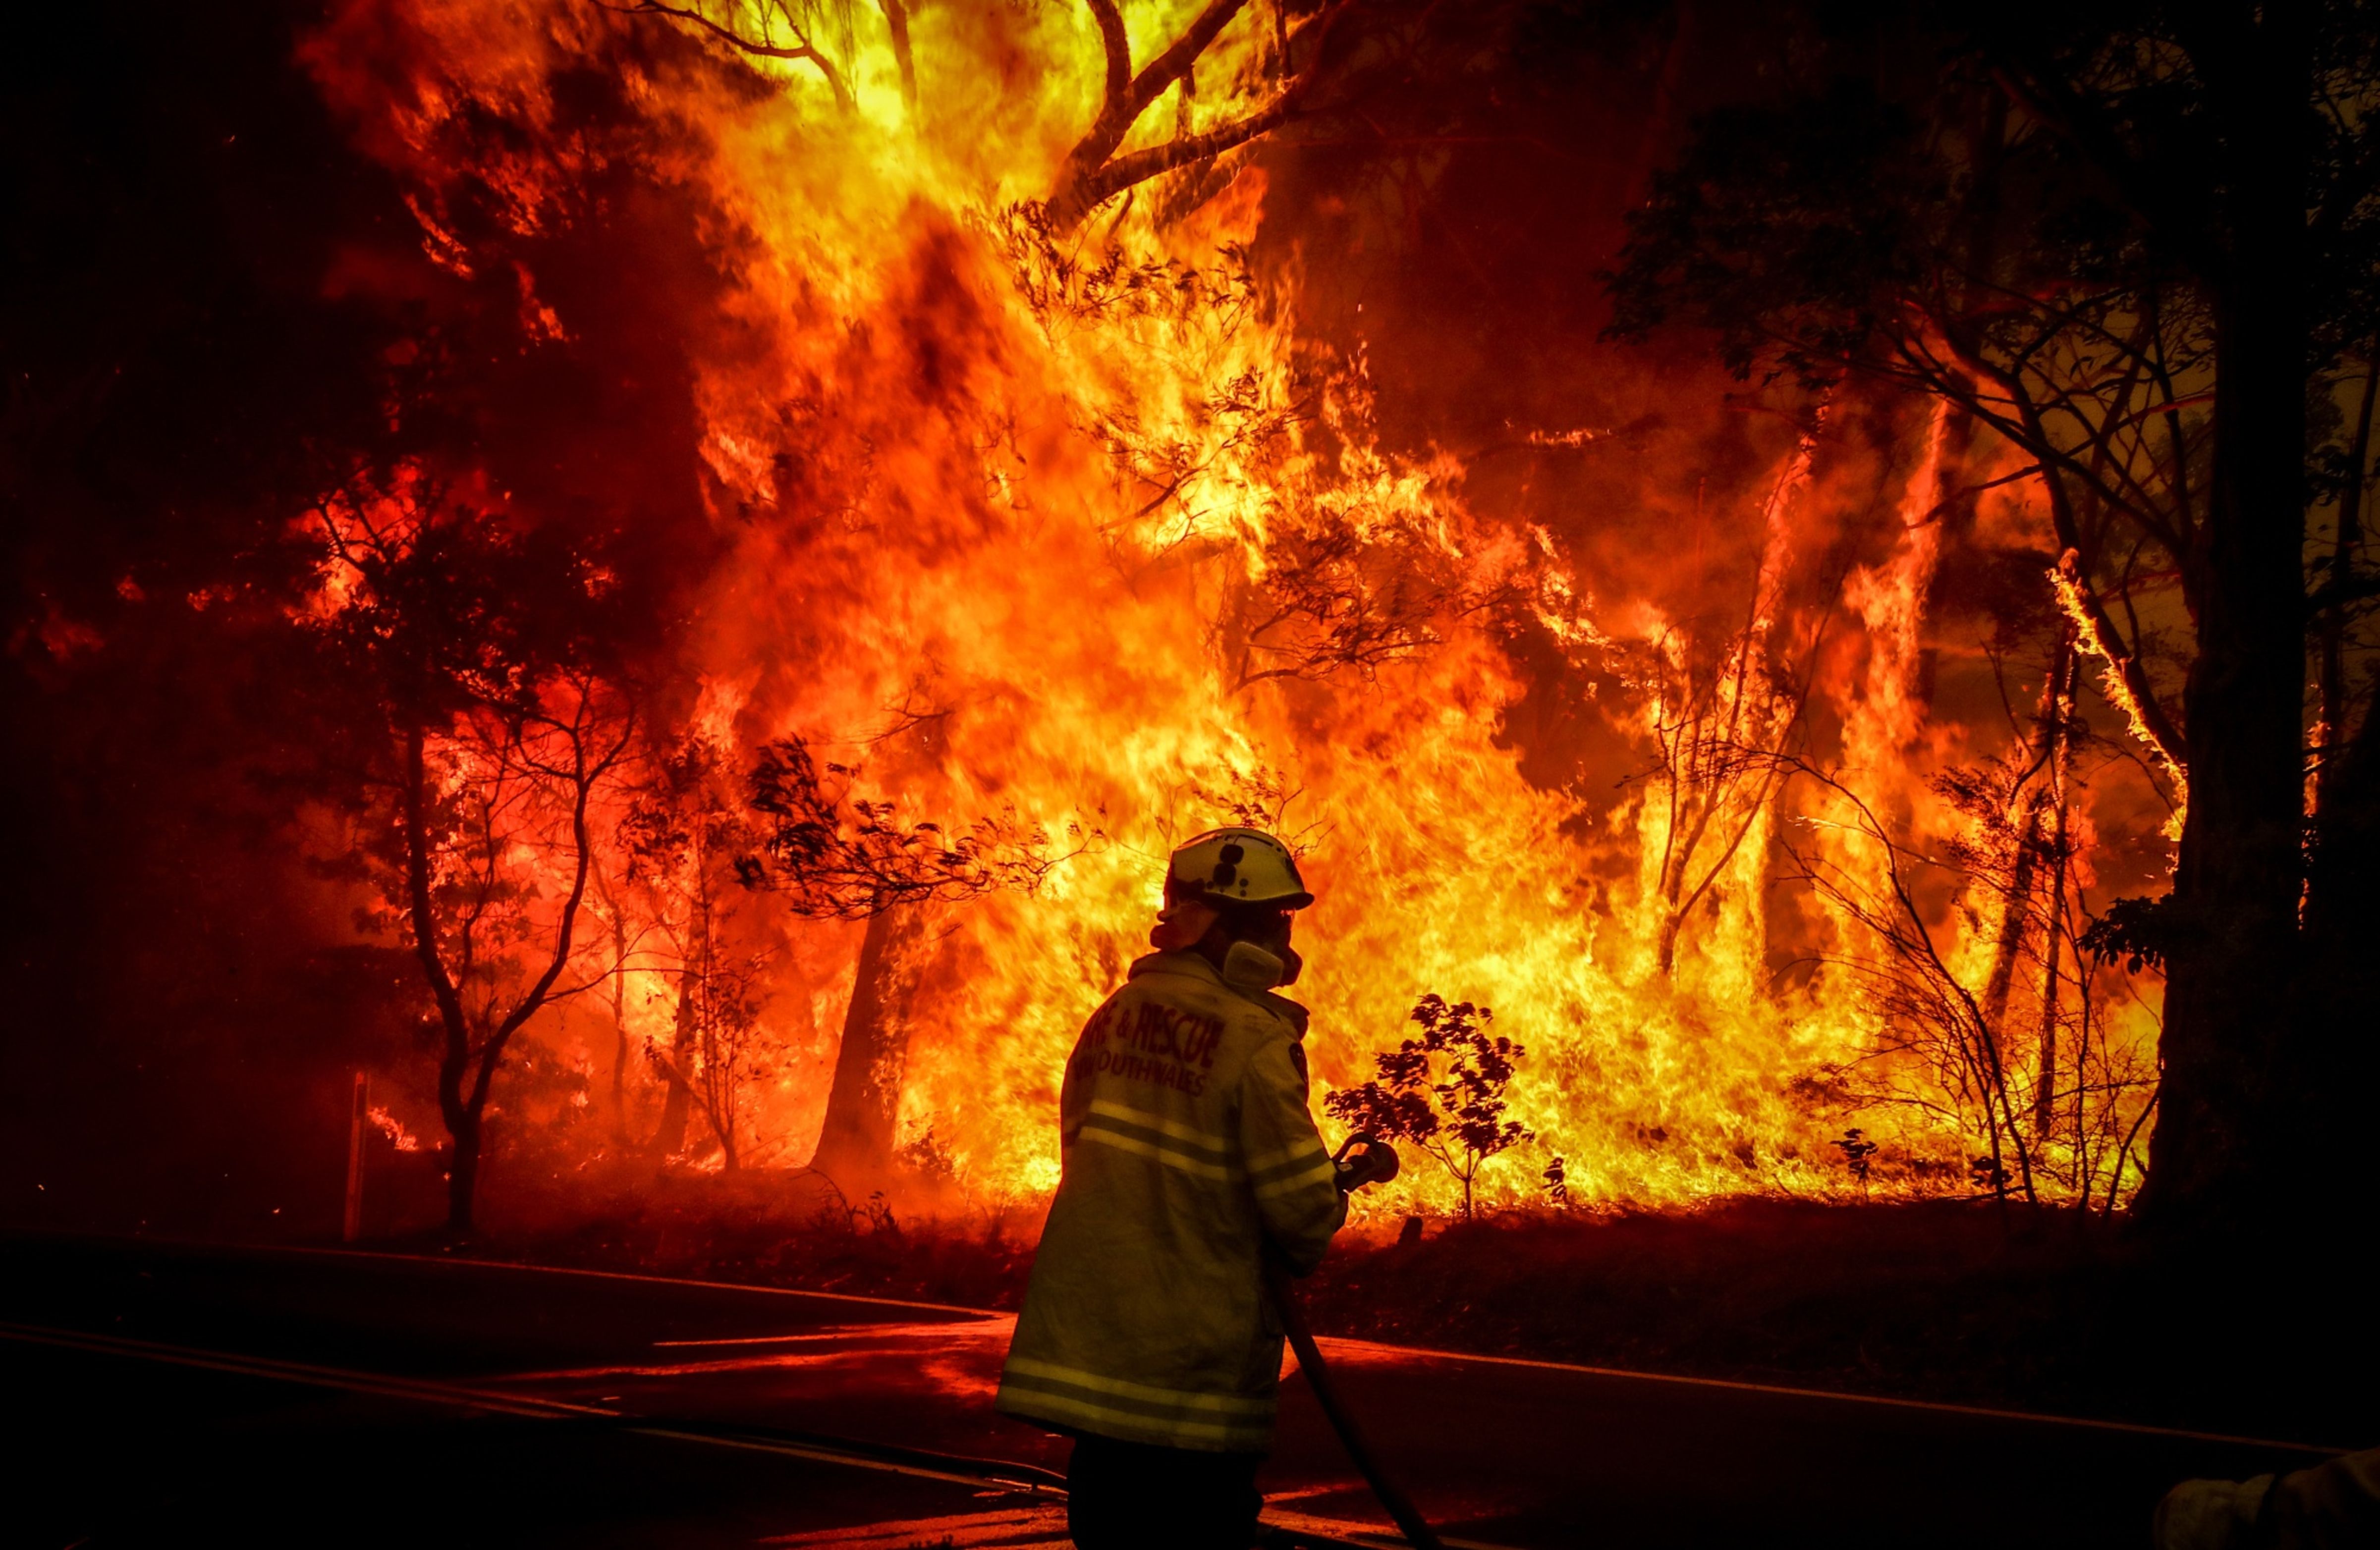 Australia Fires Houses Were Exploding In Inferno As Residents Brace For Renewed Danger The Washington Post